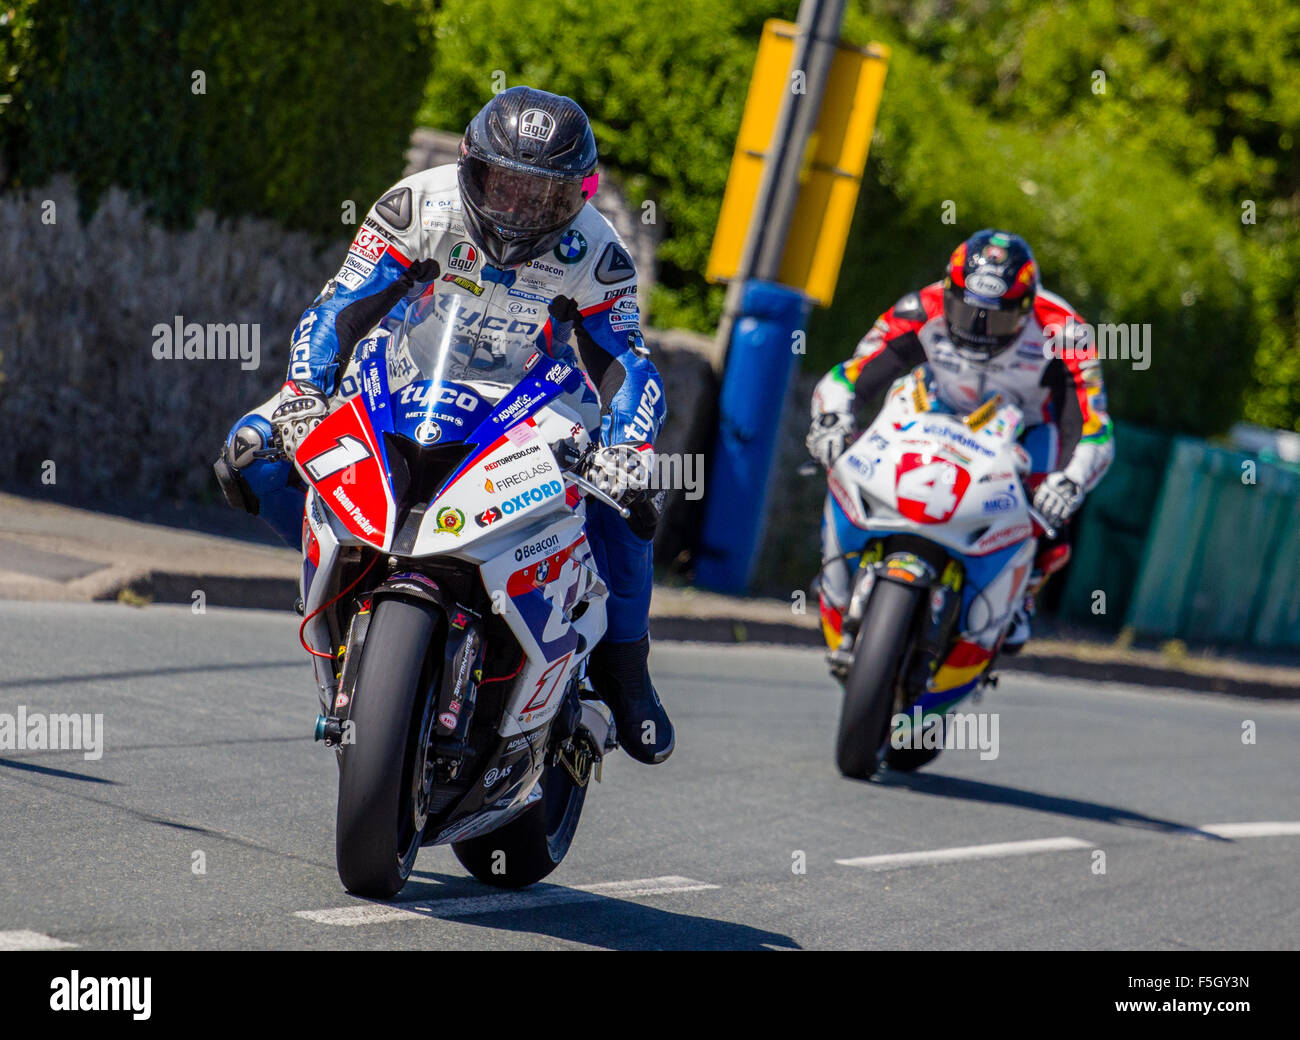 Guy Martin leads Dan Kneen at the Southern 100 road races on the Isle of Man in 2015 Stock Photo